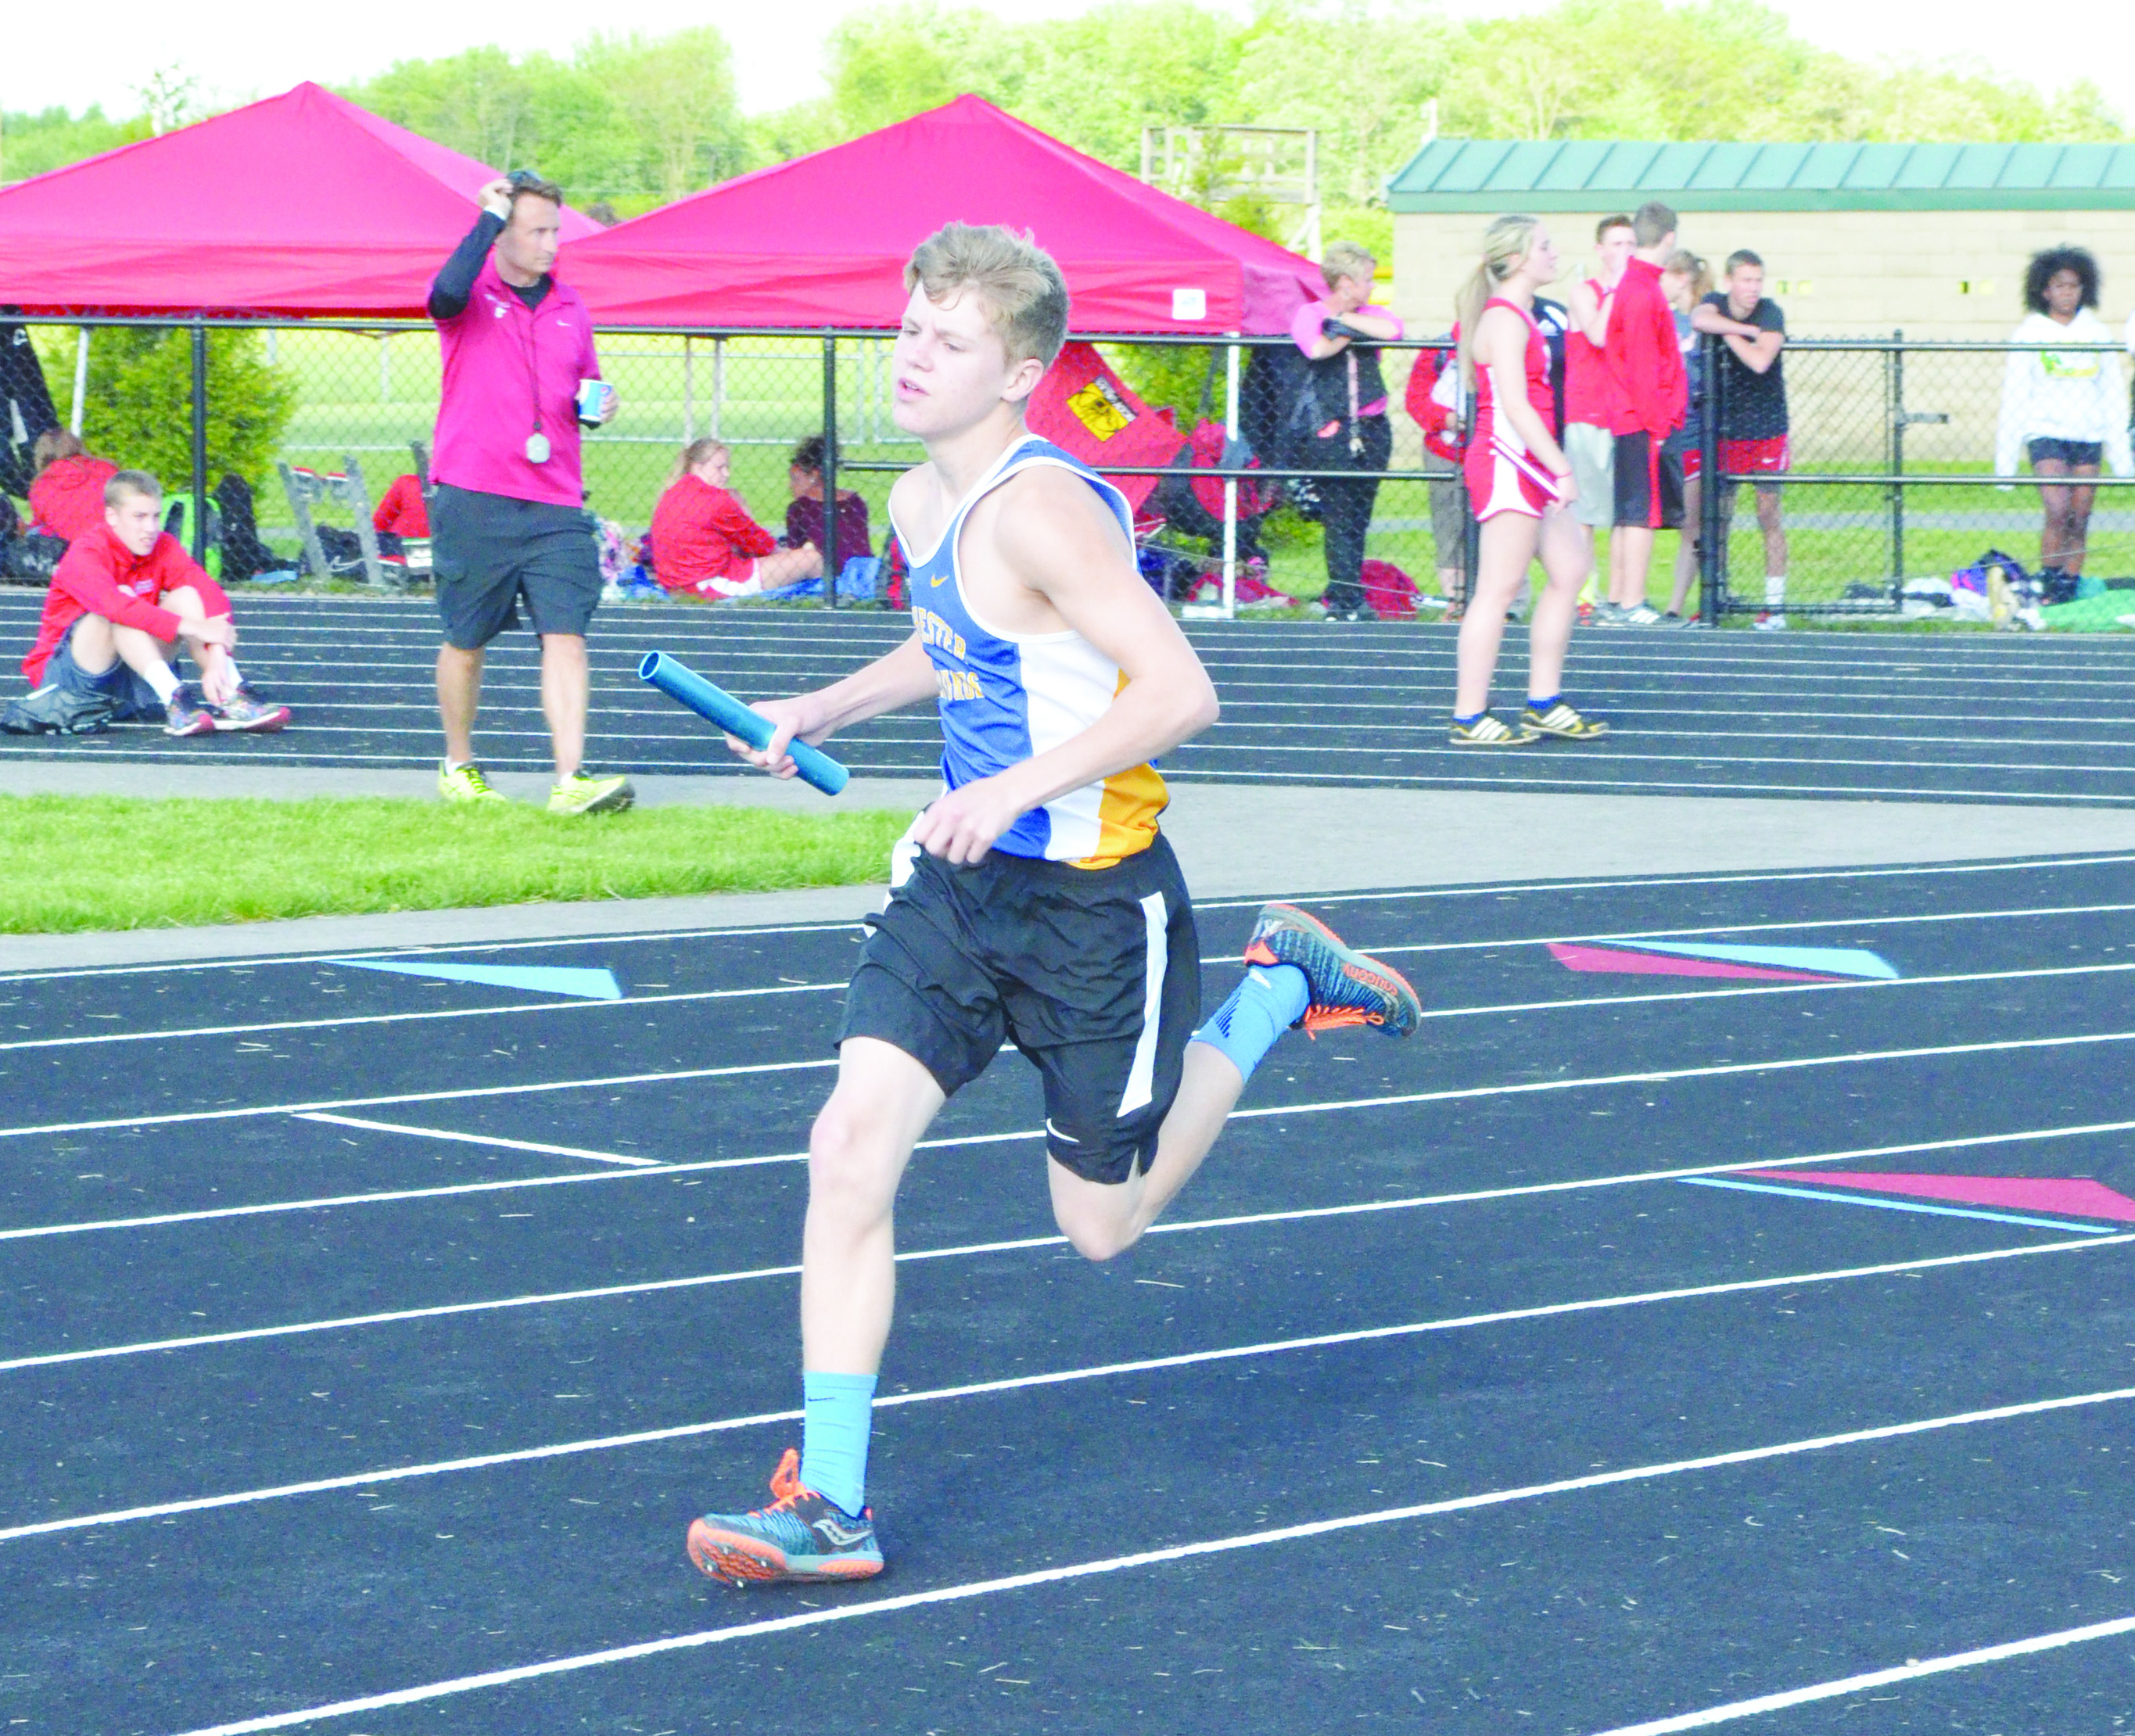 Manchester sophomore Ethan Pennywitt placed third in the Boys 3200 Meter Run and was part of the Greyhounds’ 4 x 800 relay foursome that placed second in competition at the 2016 SHAC meet.  Photo by Wade Linville.